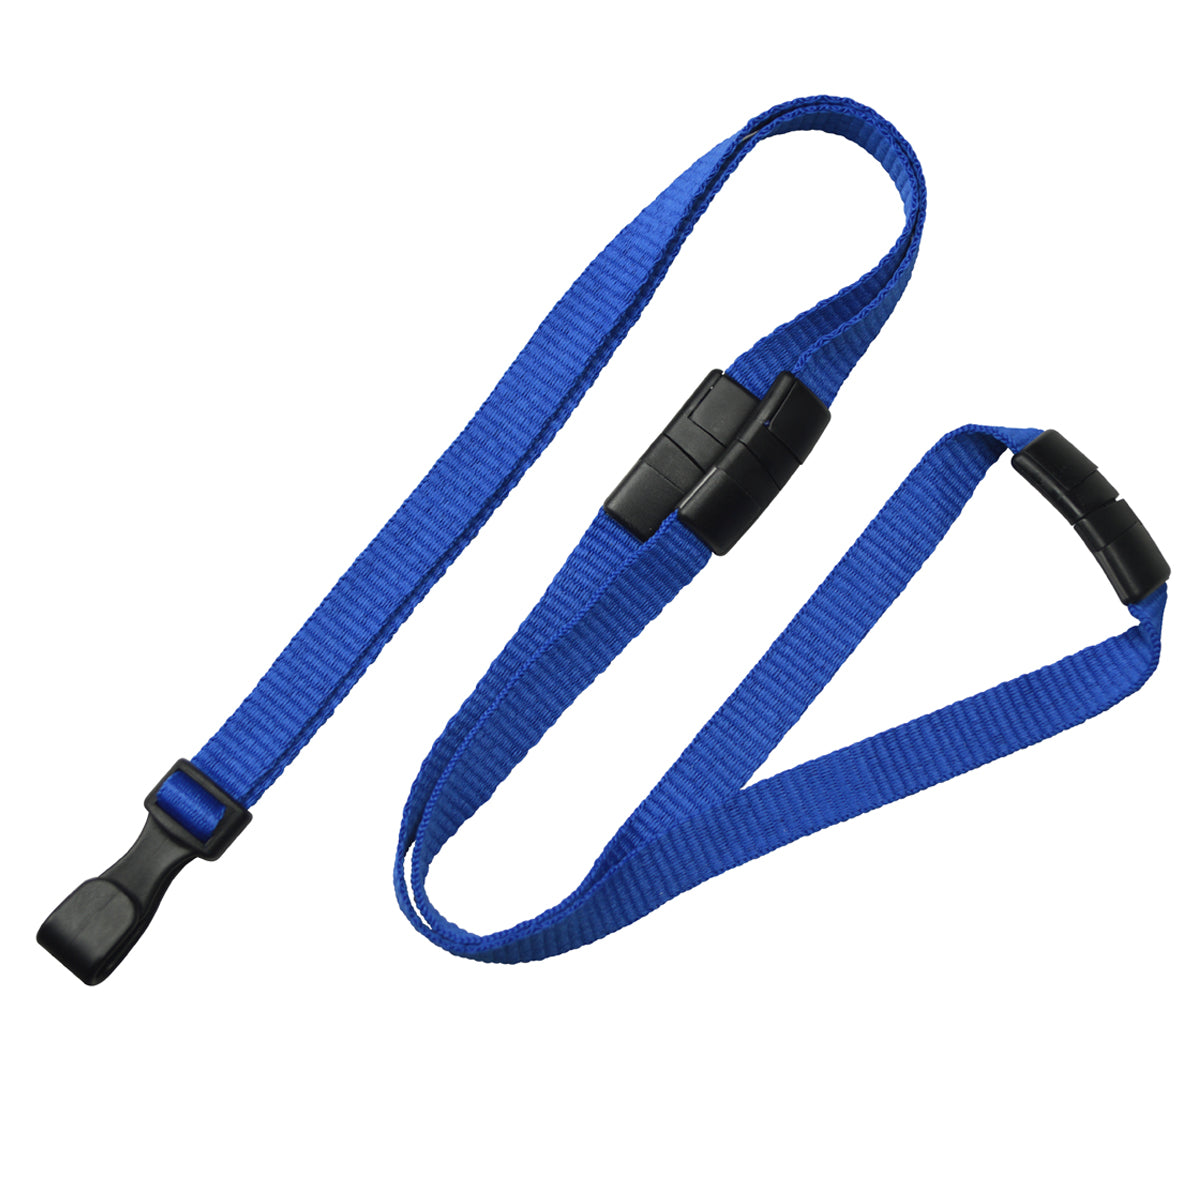 A Triple Breakaway Lanyard with THREE Safety Breakaway Points (2137-300X), featuring a black plastic clip, an adjustable loop, and a no twist design ideal for snag-sensitive environments.